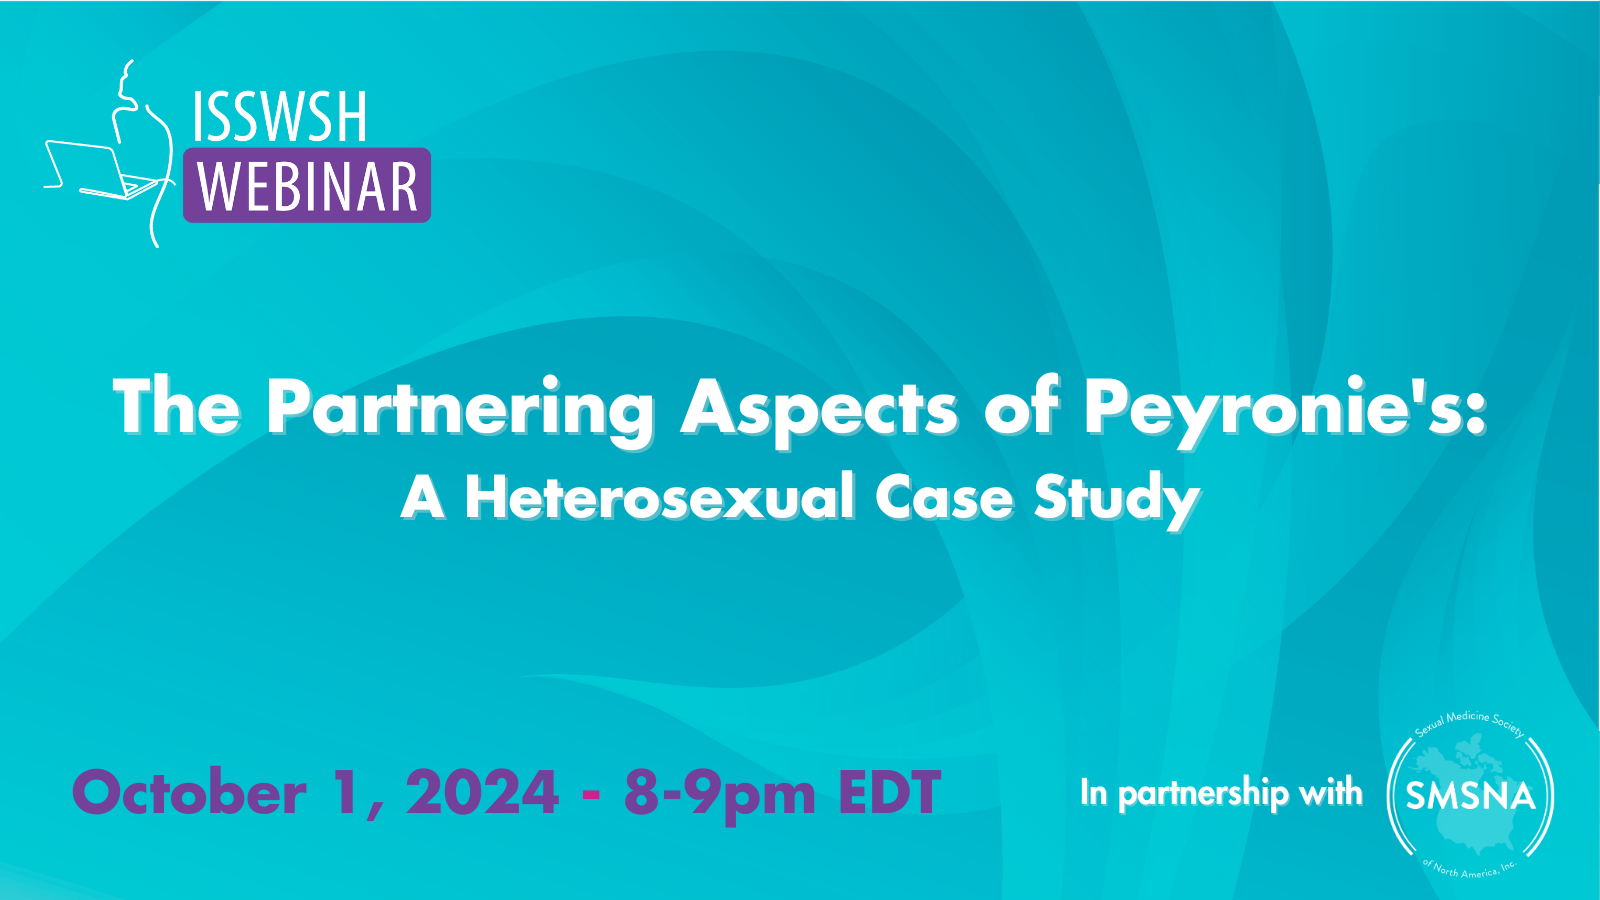 The Partnering Aspects of Peyronie's: A Heterosexual Case Study